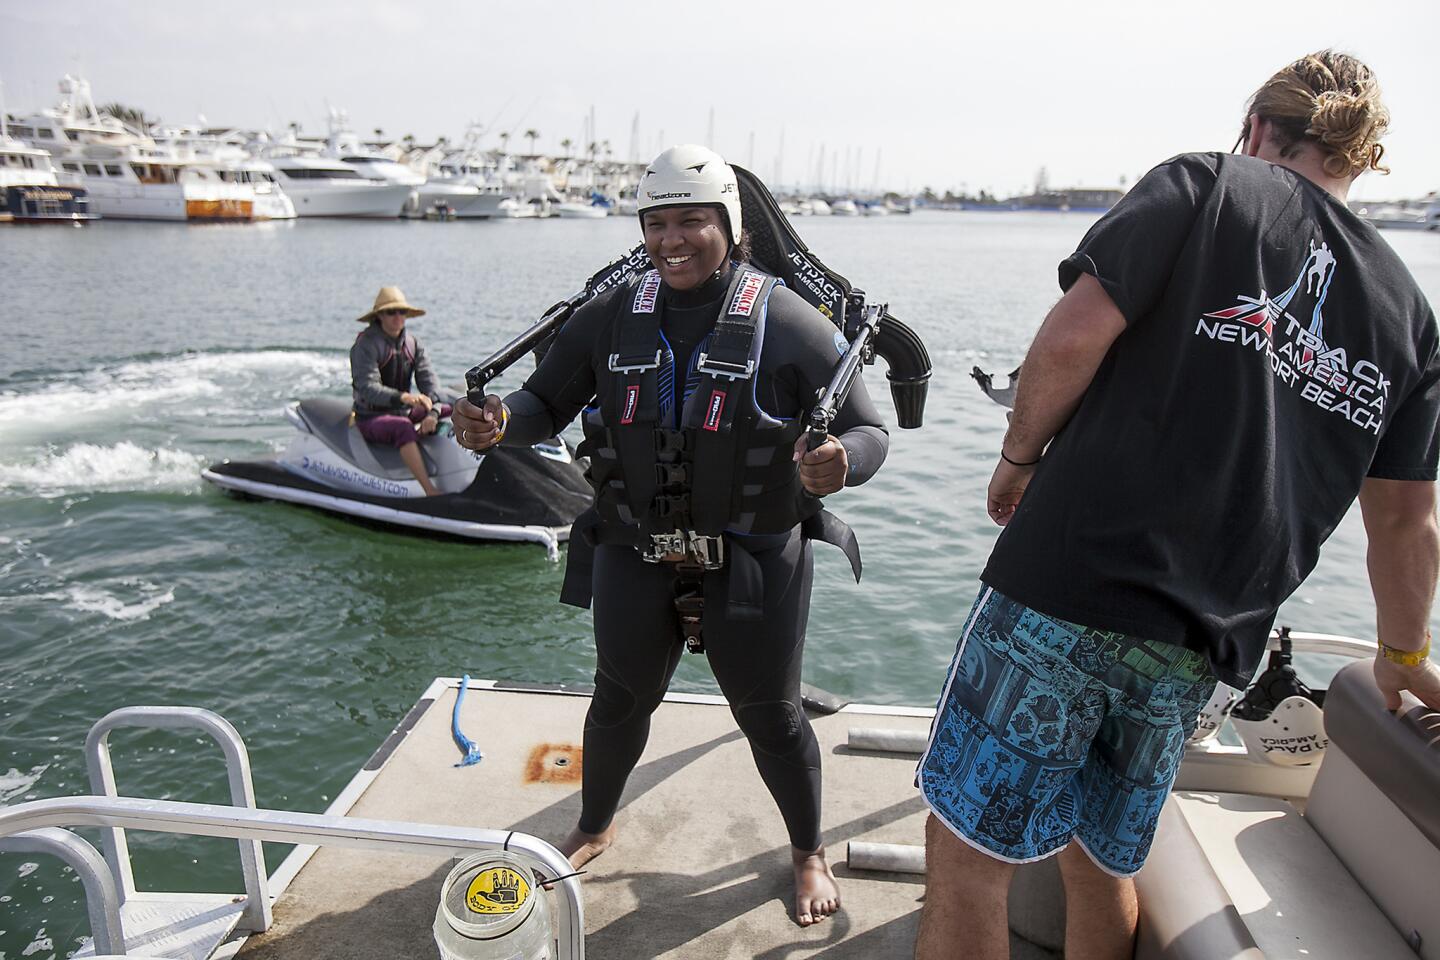 Grace Henley of Houston is suited up and ready to go this month with Jetpack America in Newport Beach.